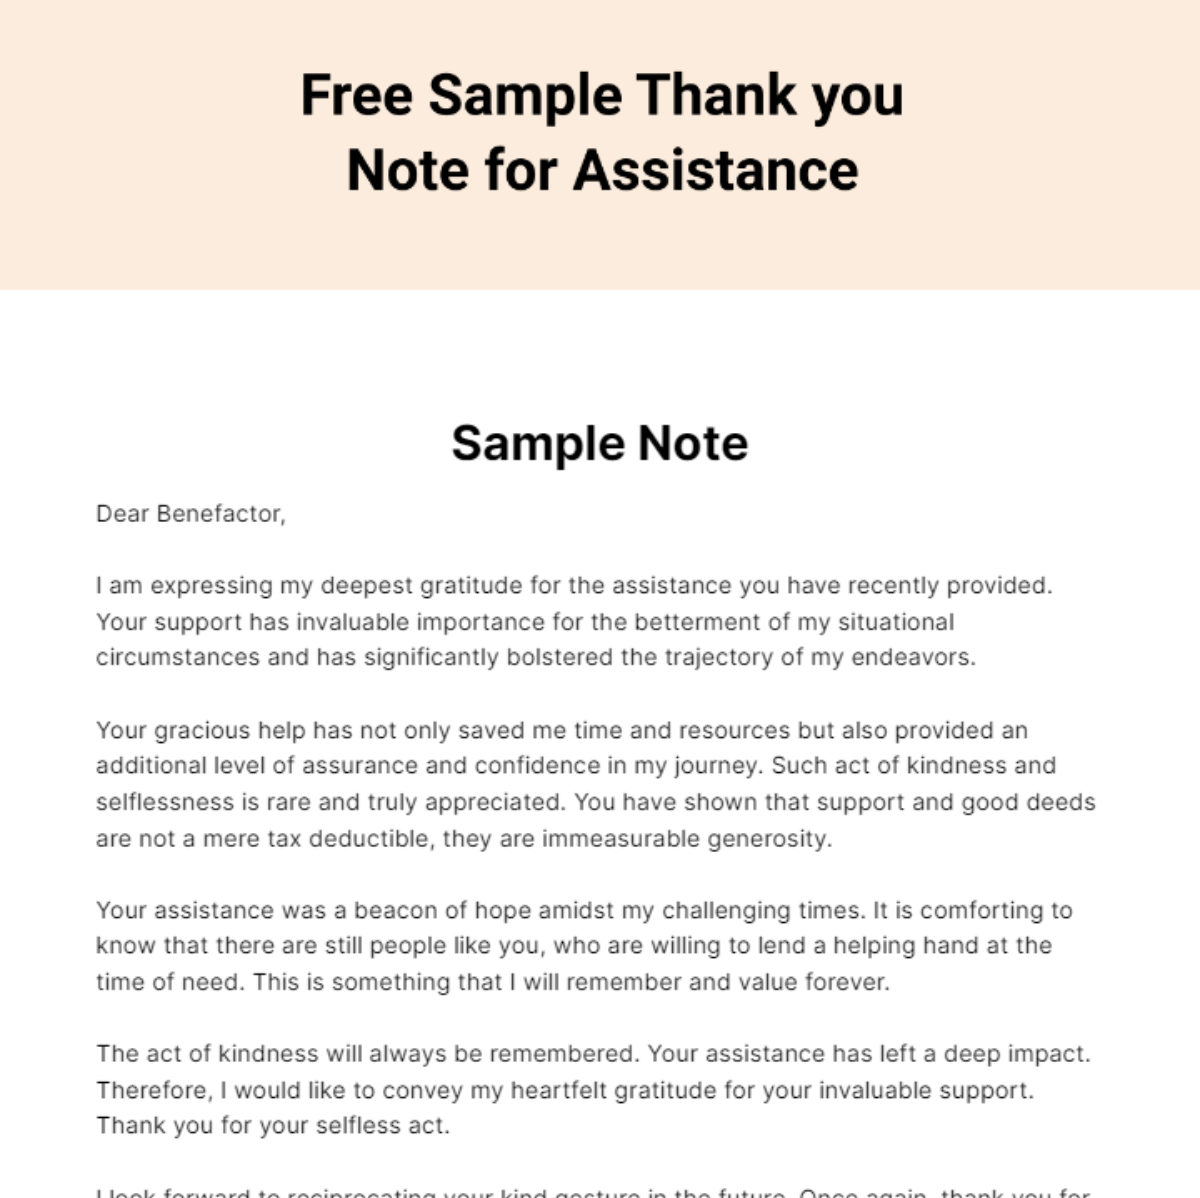 Sample Thank you Note for Assistance Template